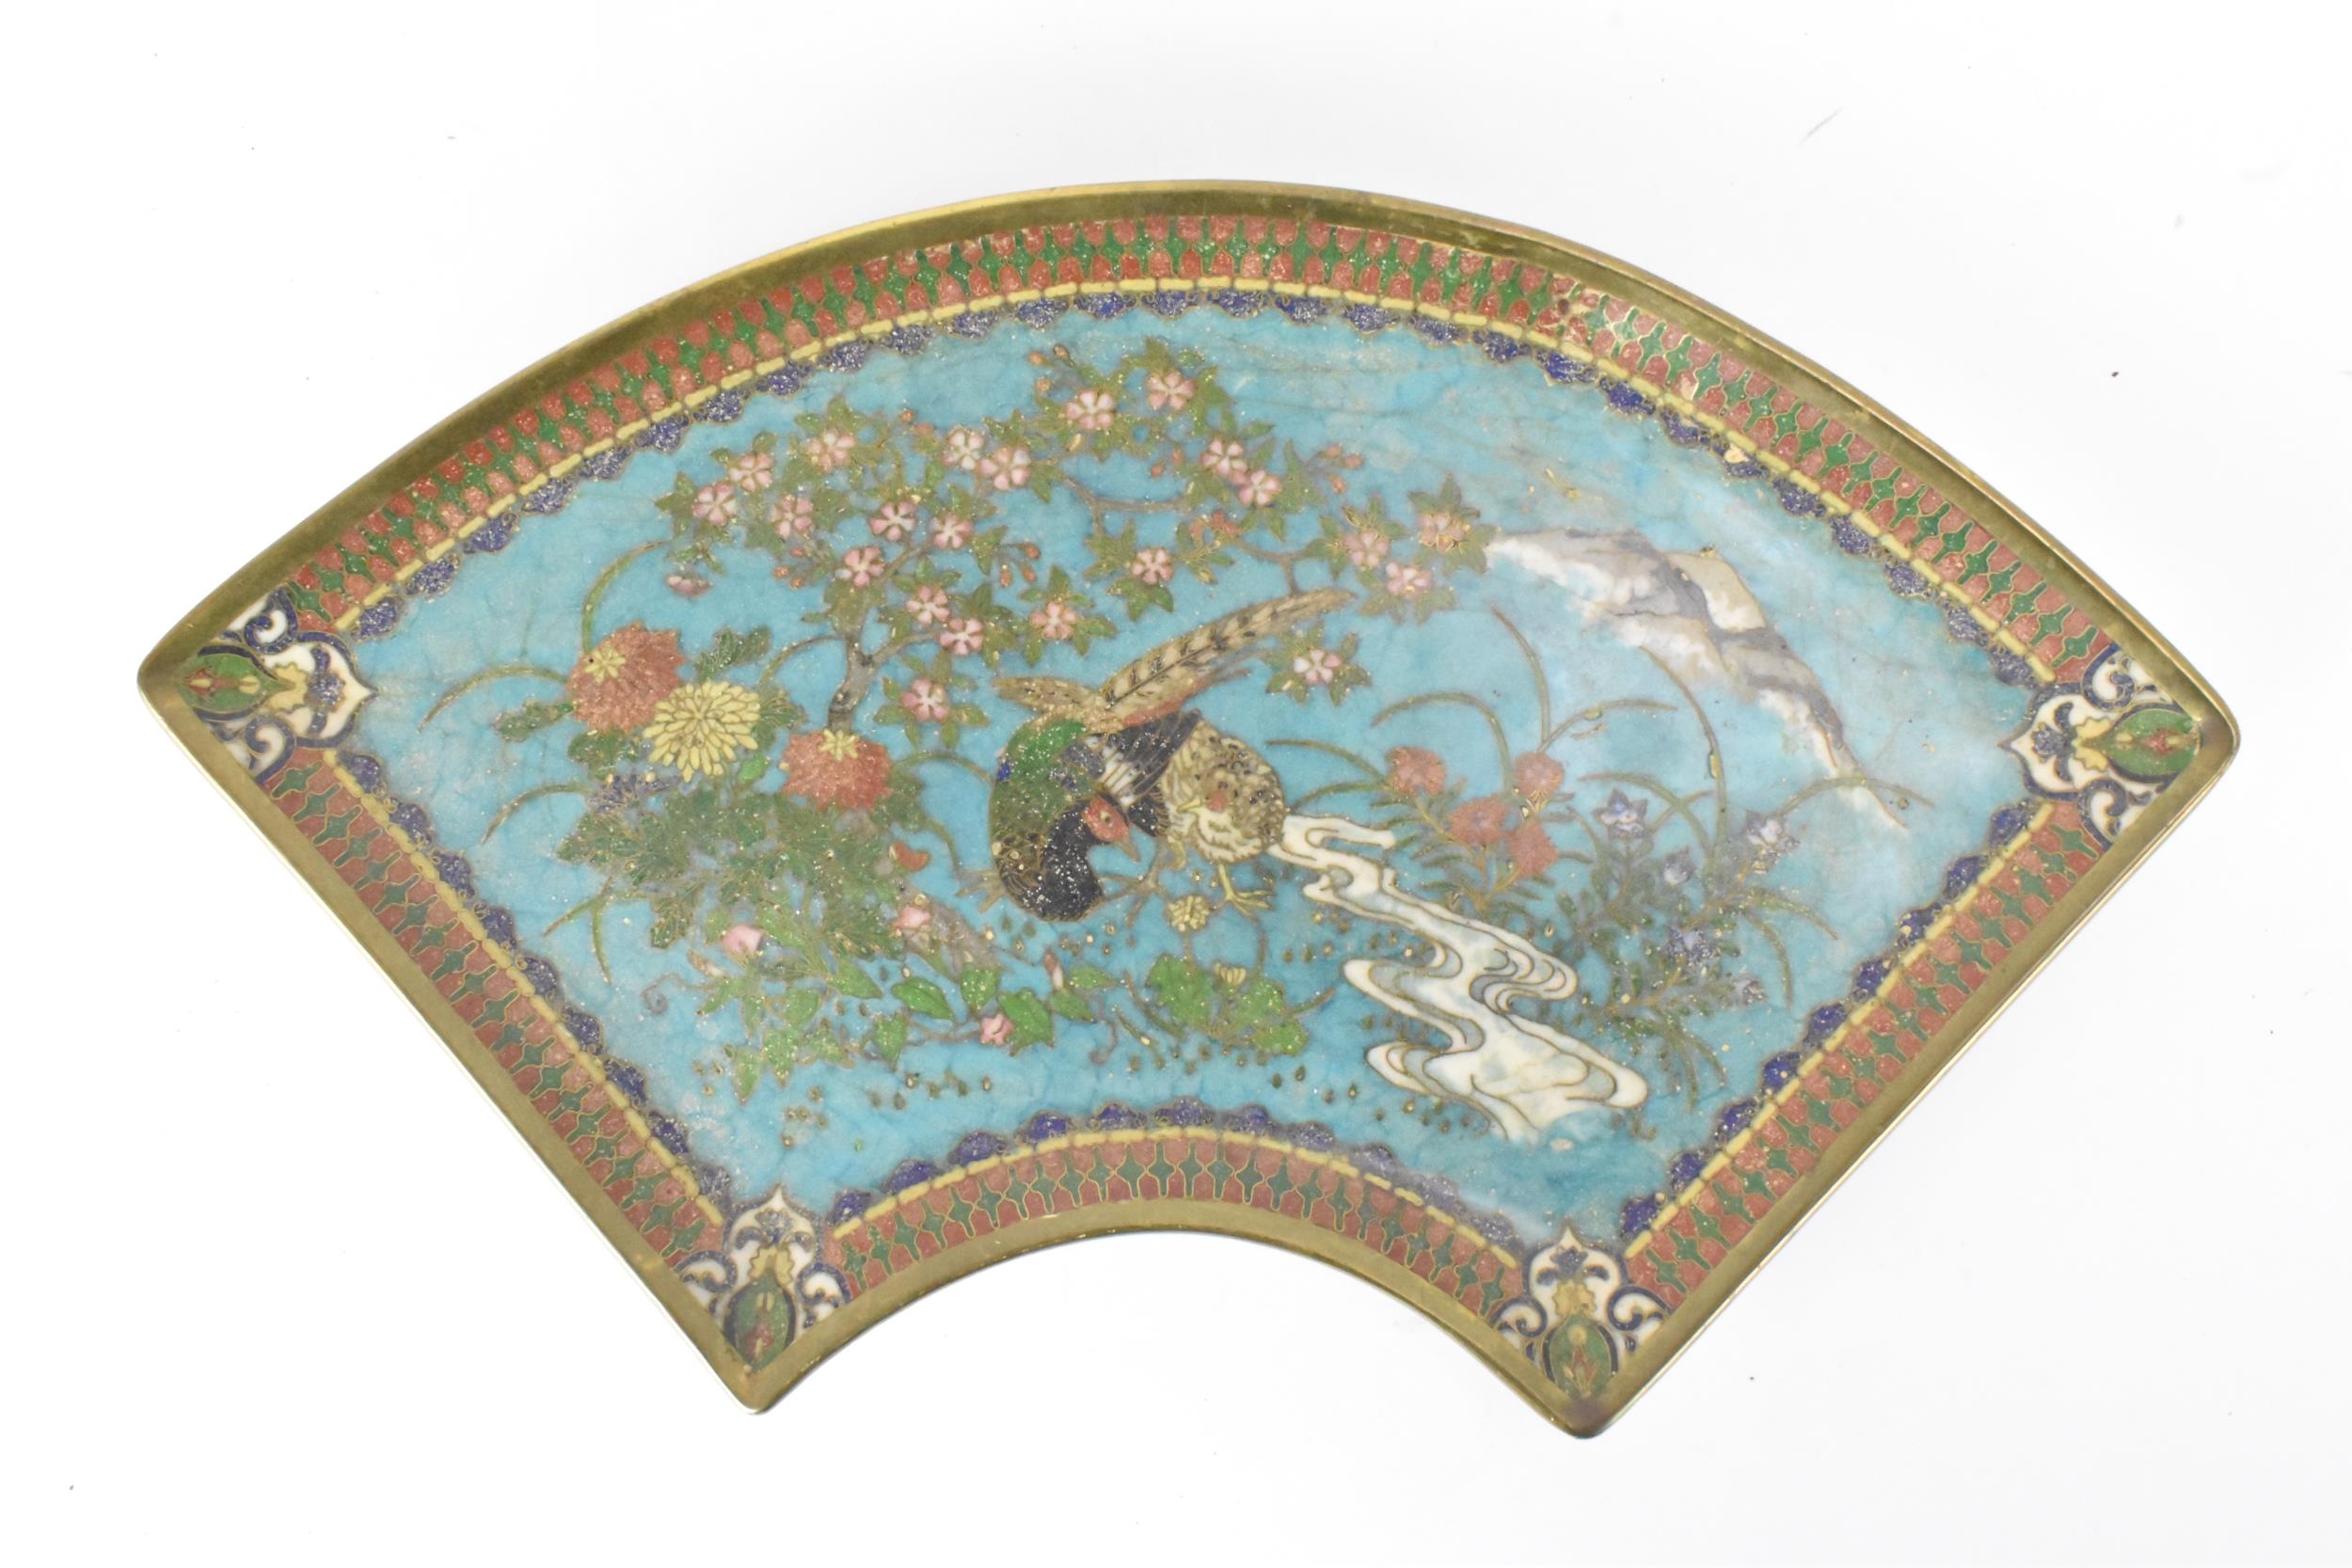 A Japanese Meiji period cloisonne serving dish, circa 1880, decorated with central birds among